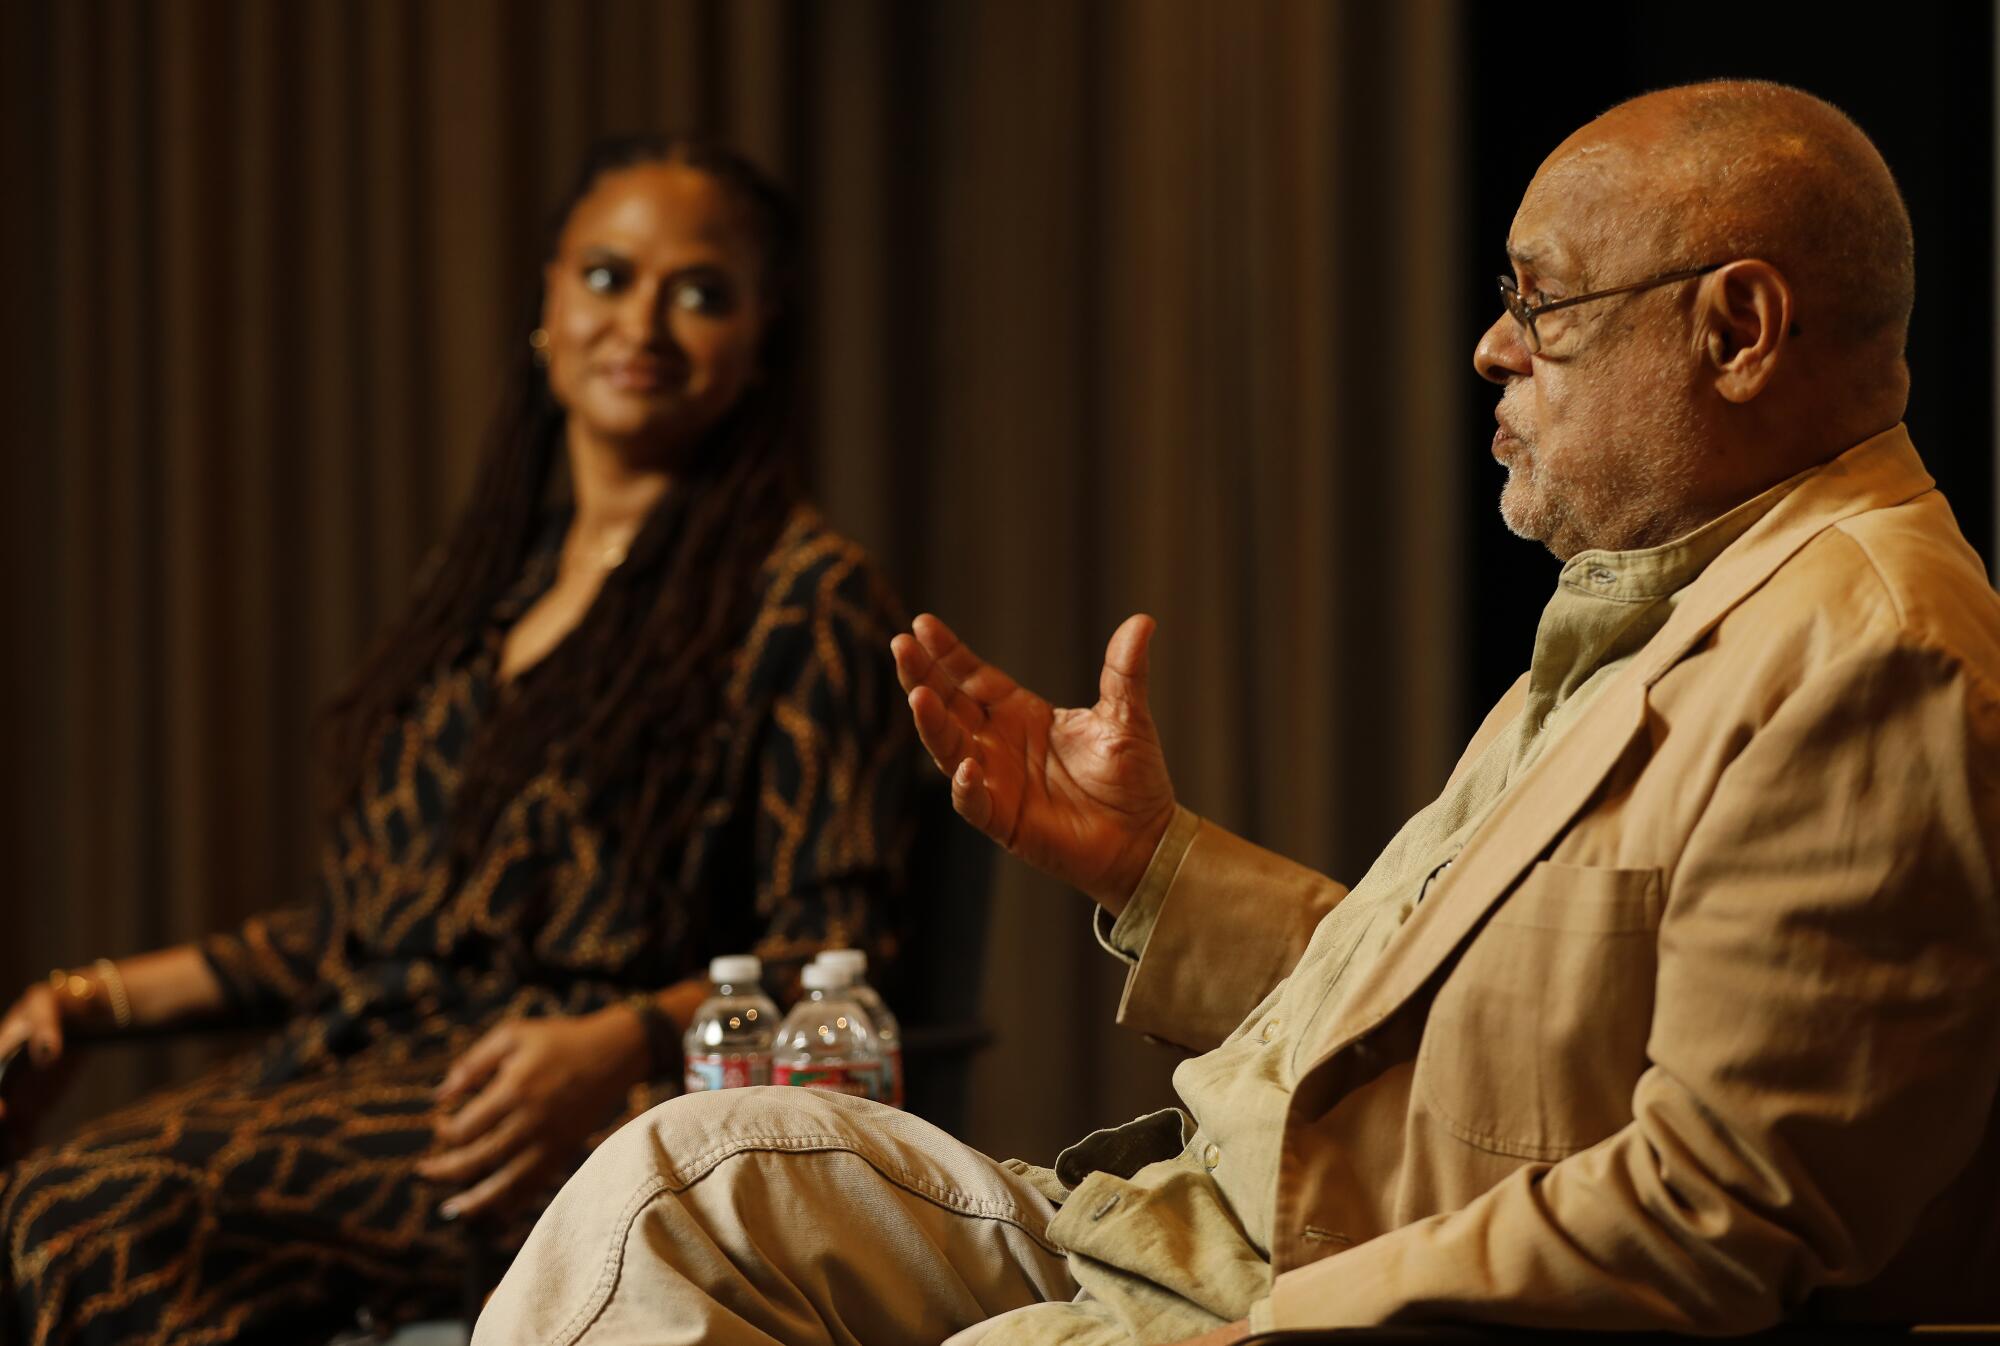 Filmmakers Ava DuVernay and Haile Gerima have a sit-down conversation.